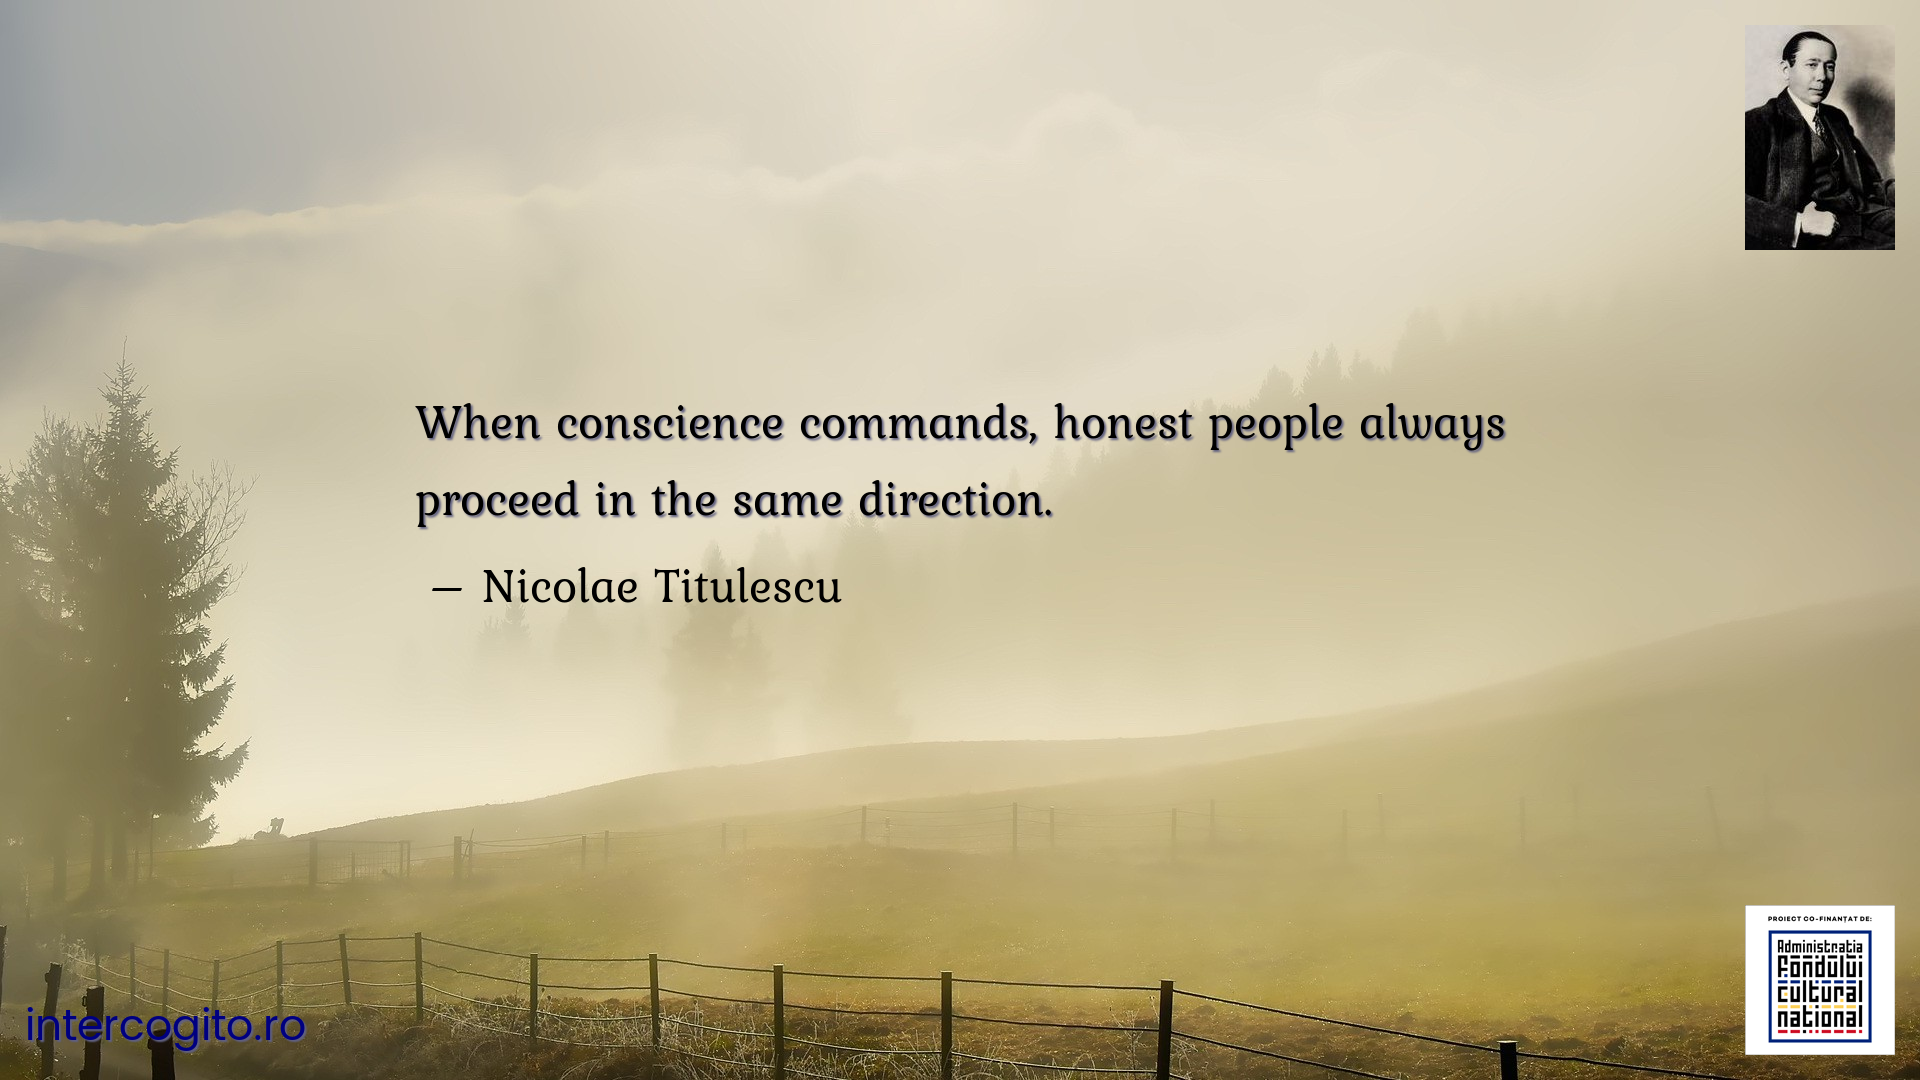 When conscience commands, honest people always proceed in the same direction.